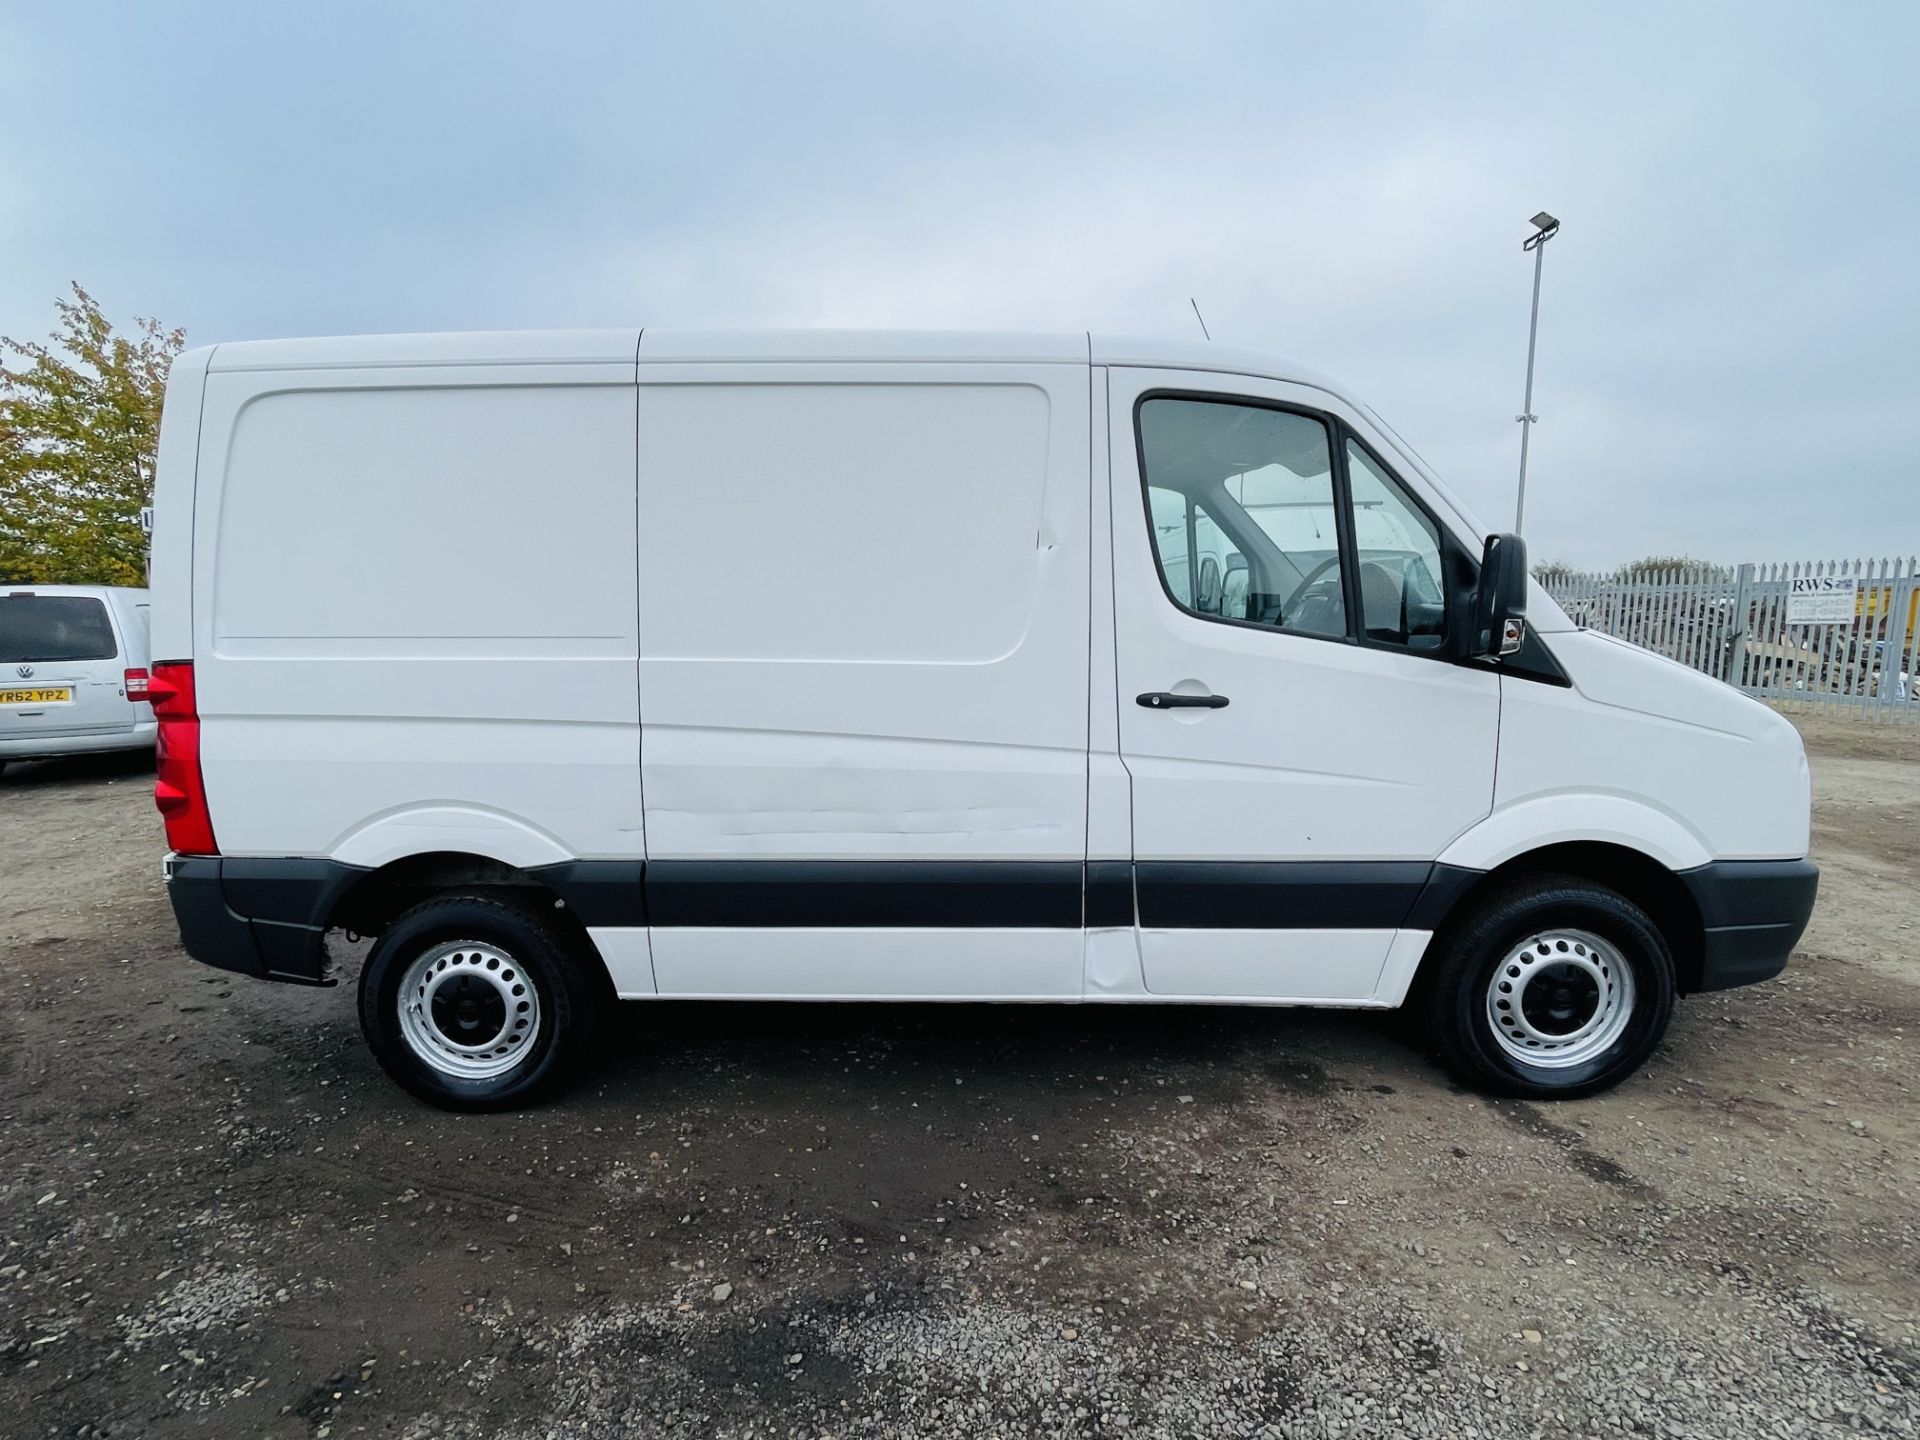 Volkswagen Crafter CR30 2.0 TDI 109 L1 H1 2012 ' 62 Reg' - Air Con - No Vat Save 20% - Image 15 of 19